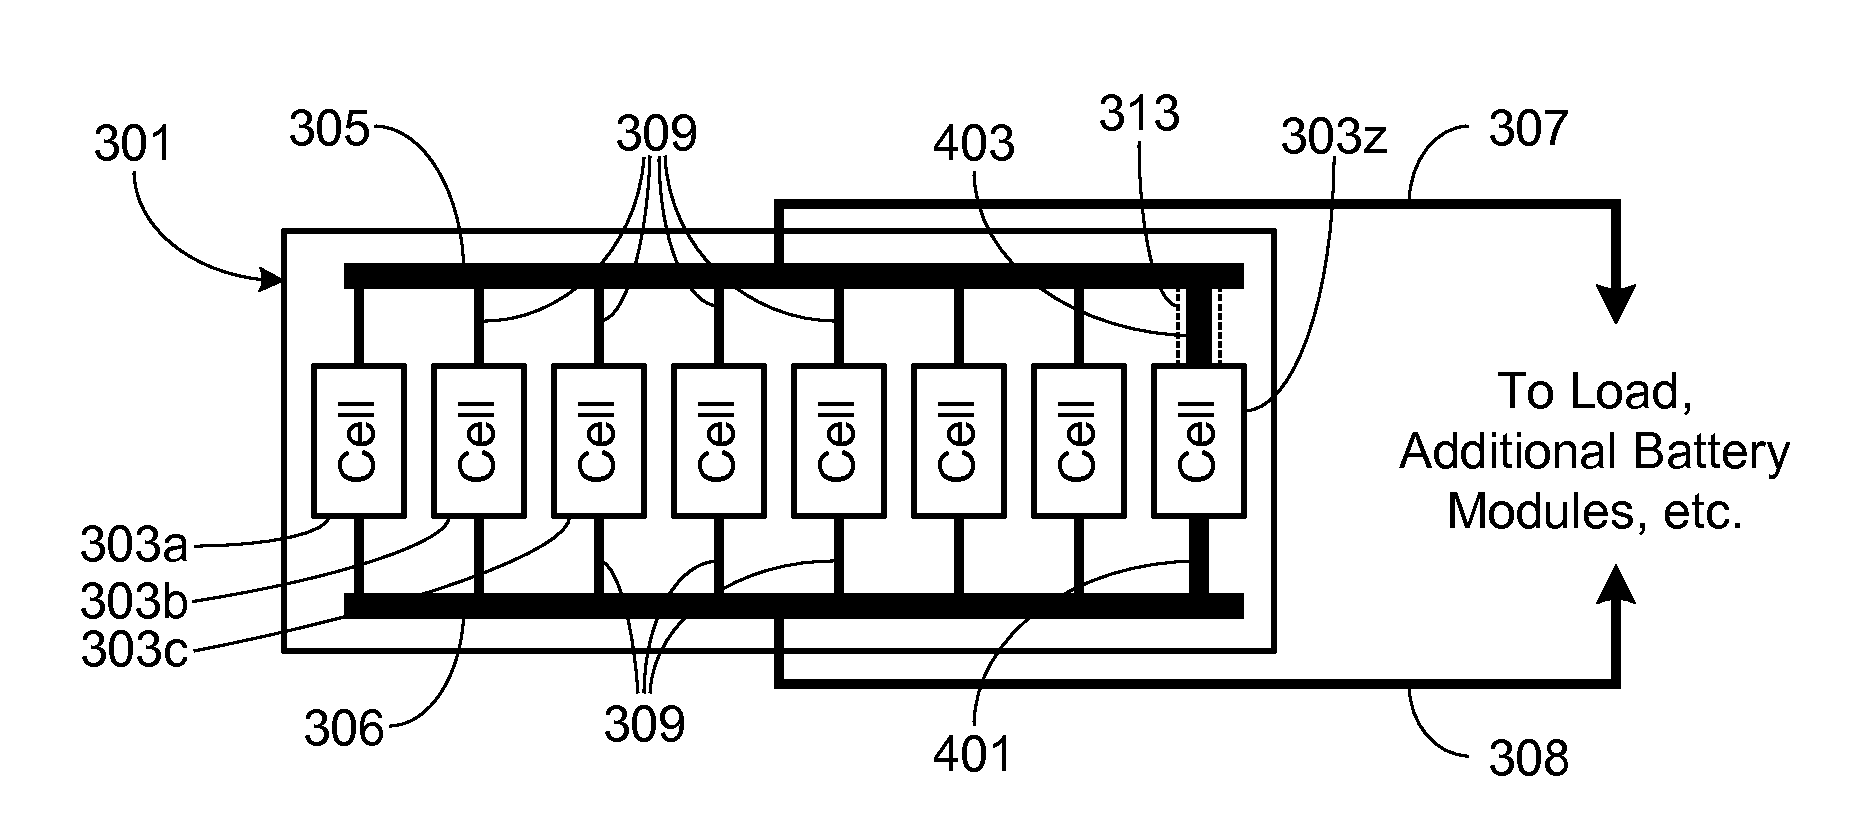 Method of Controlled Cell-Level Fusing Within a Battery Pack